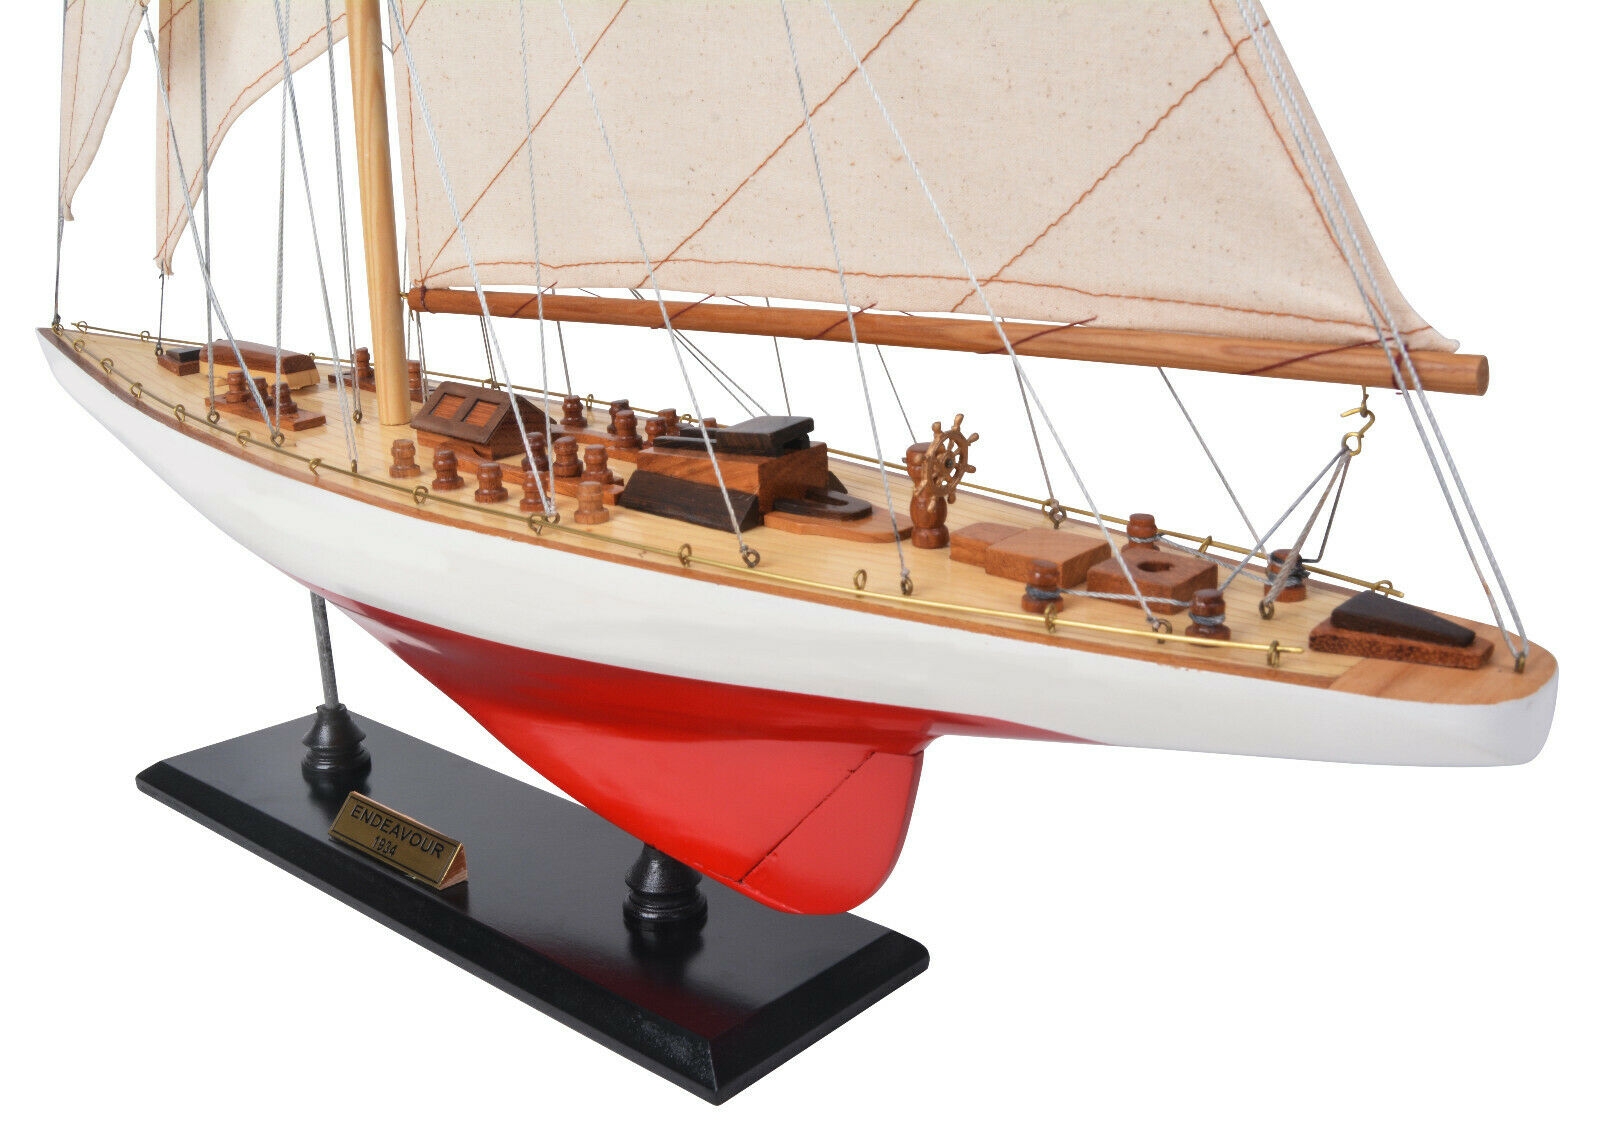 America's Cup Endeavor Yacht Wood Model Sailboat J Boat 24" 